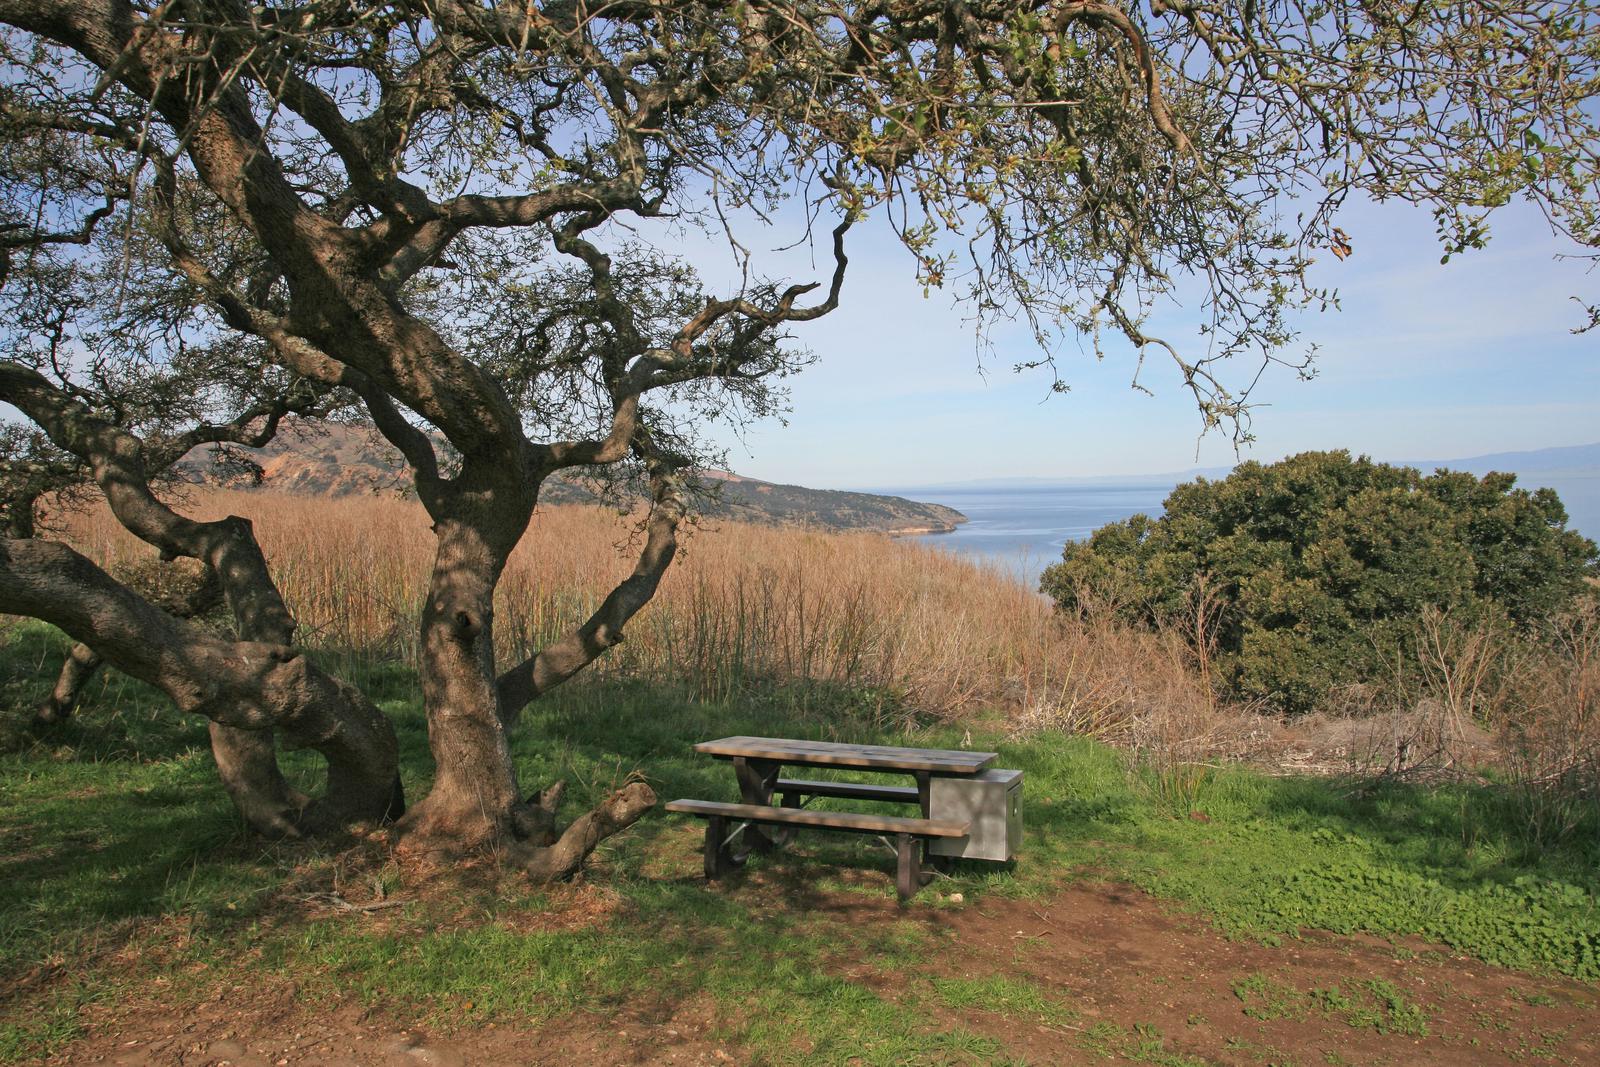 Picnic table next to large tree overlooking oceanBACKCOUNTRY AREA - 003
